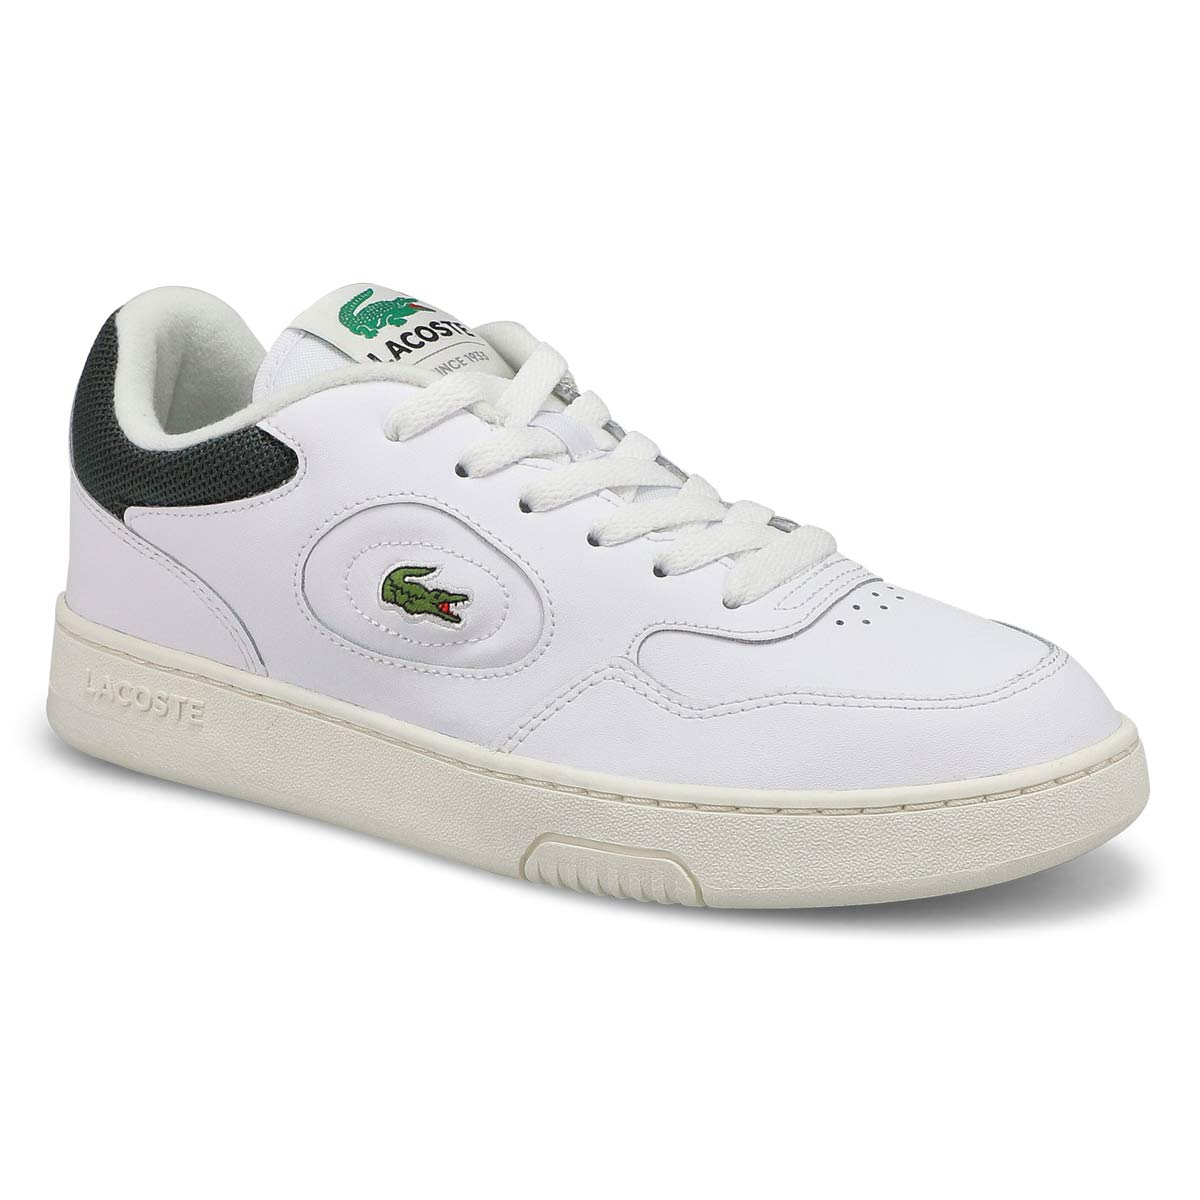 Lacoste Women's Lineset Leather Lace Up Sneak | SoftMoc.com